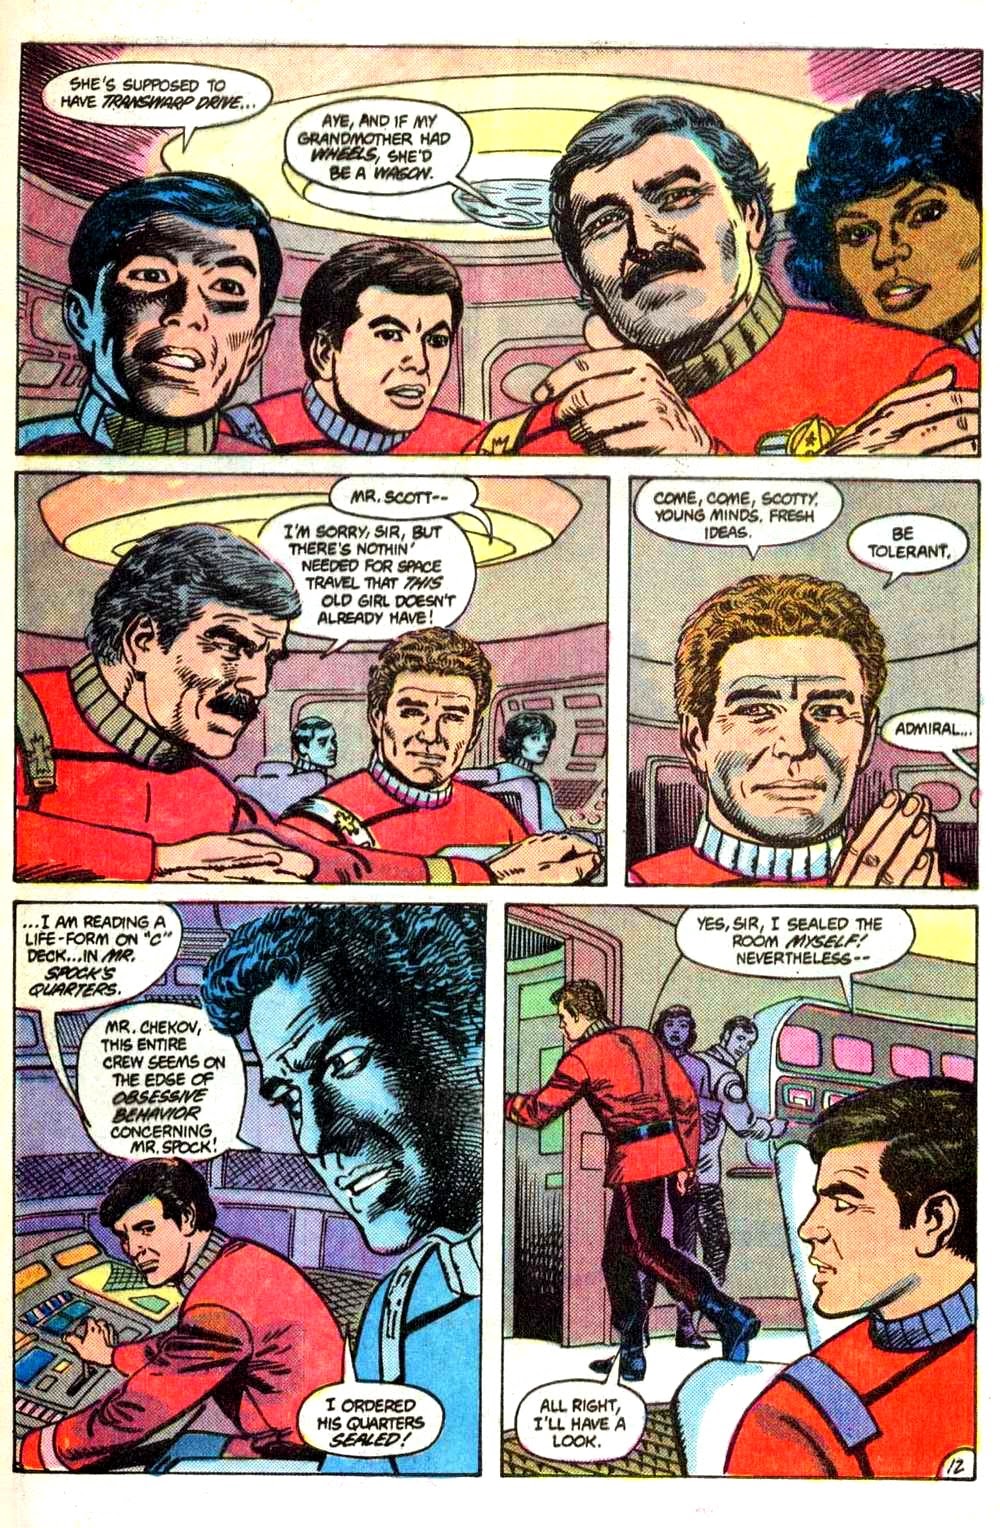 Read online Star Trek III: The Search for Spock comic -  Issue # Full - 14